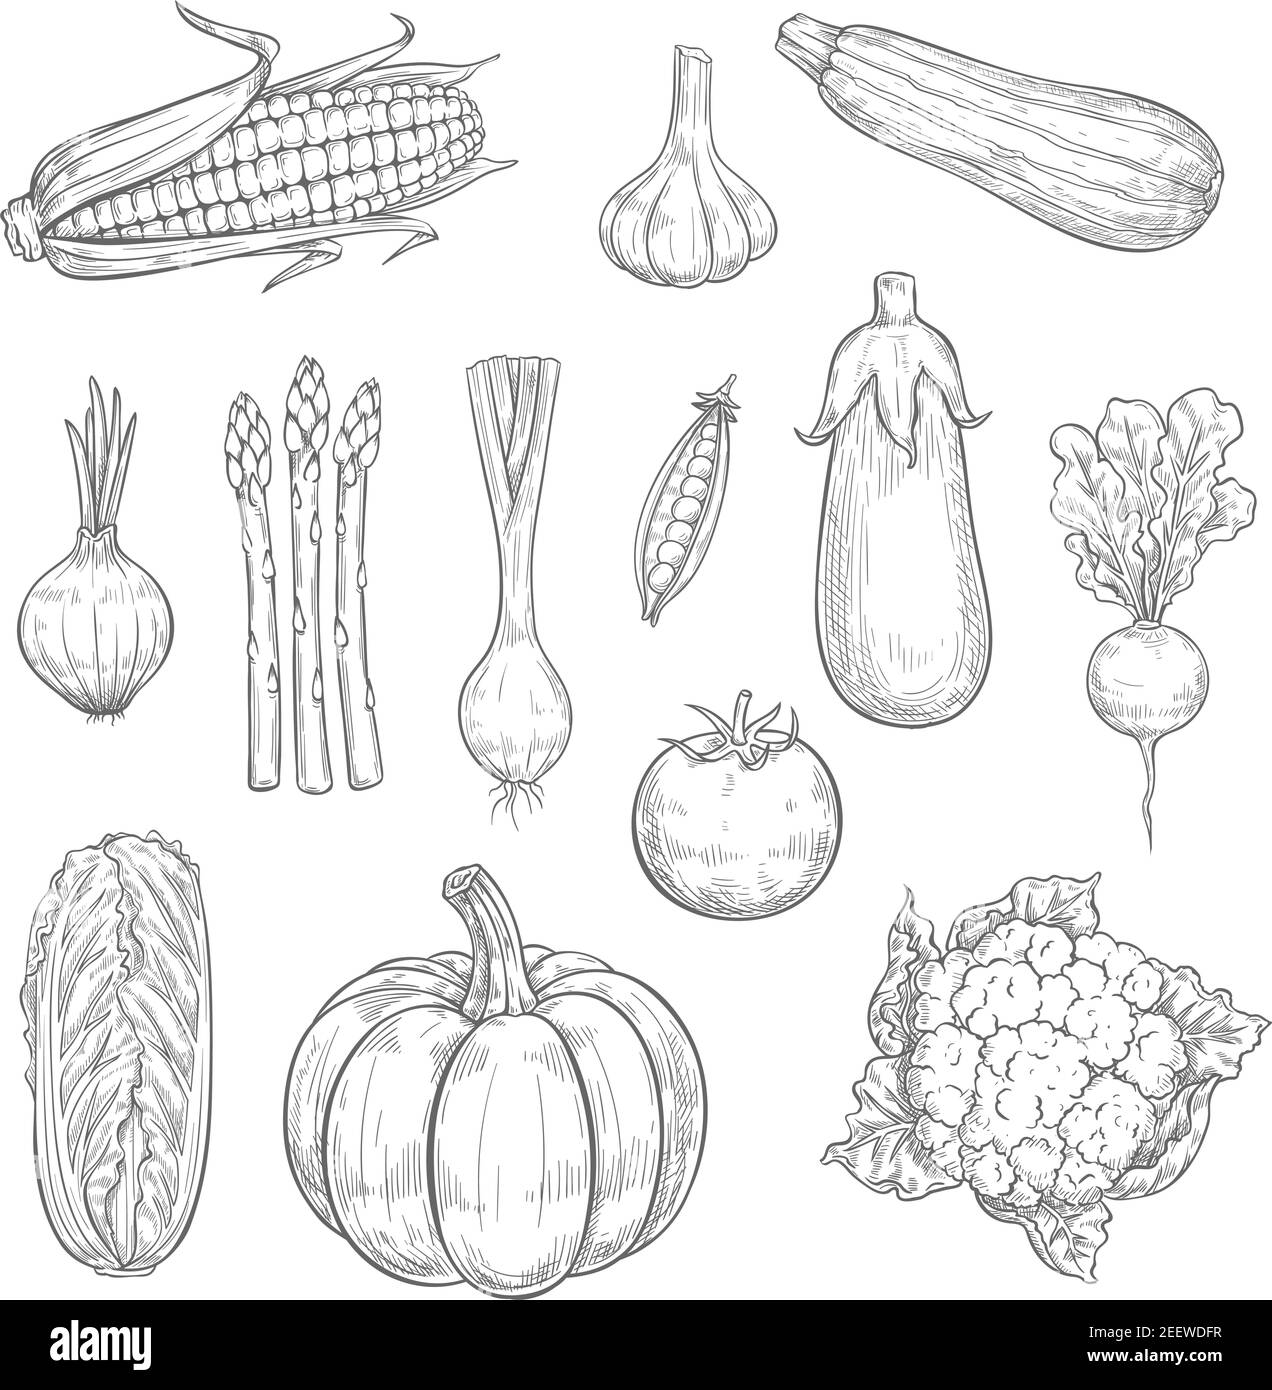 Vegetables sketch icons and natural veggies. Vector isolated set of farm harvest zucchini, carrot or pumpkin and pepper, garden eggplant, radish or to Stock Vector